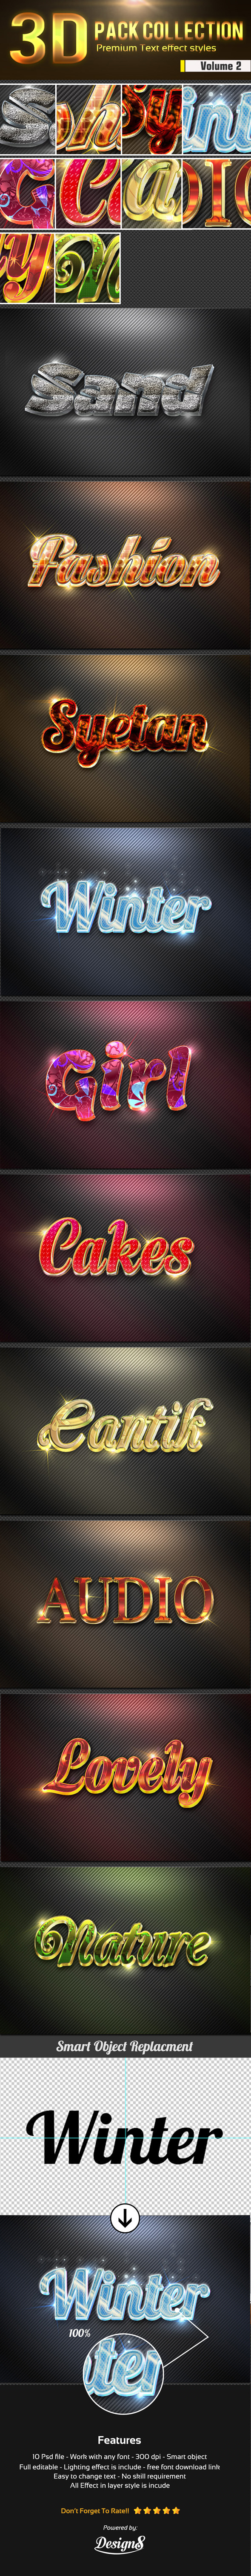 New 3D Photoshop Text Effect Style Vol 2